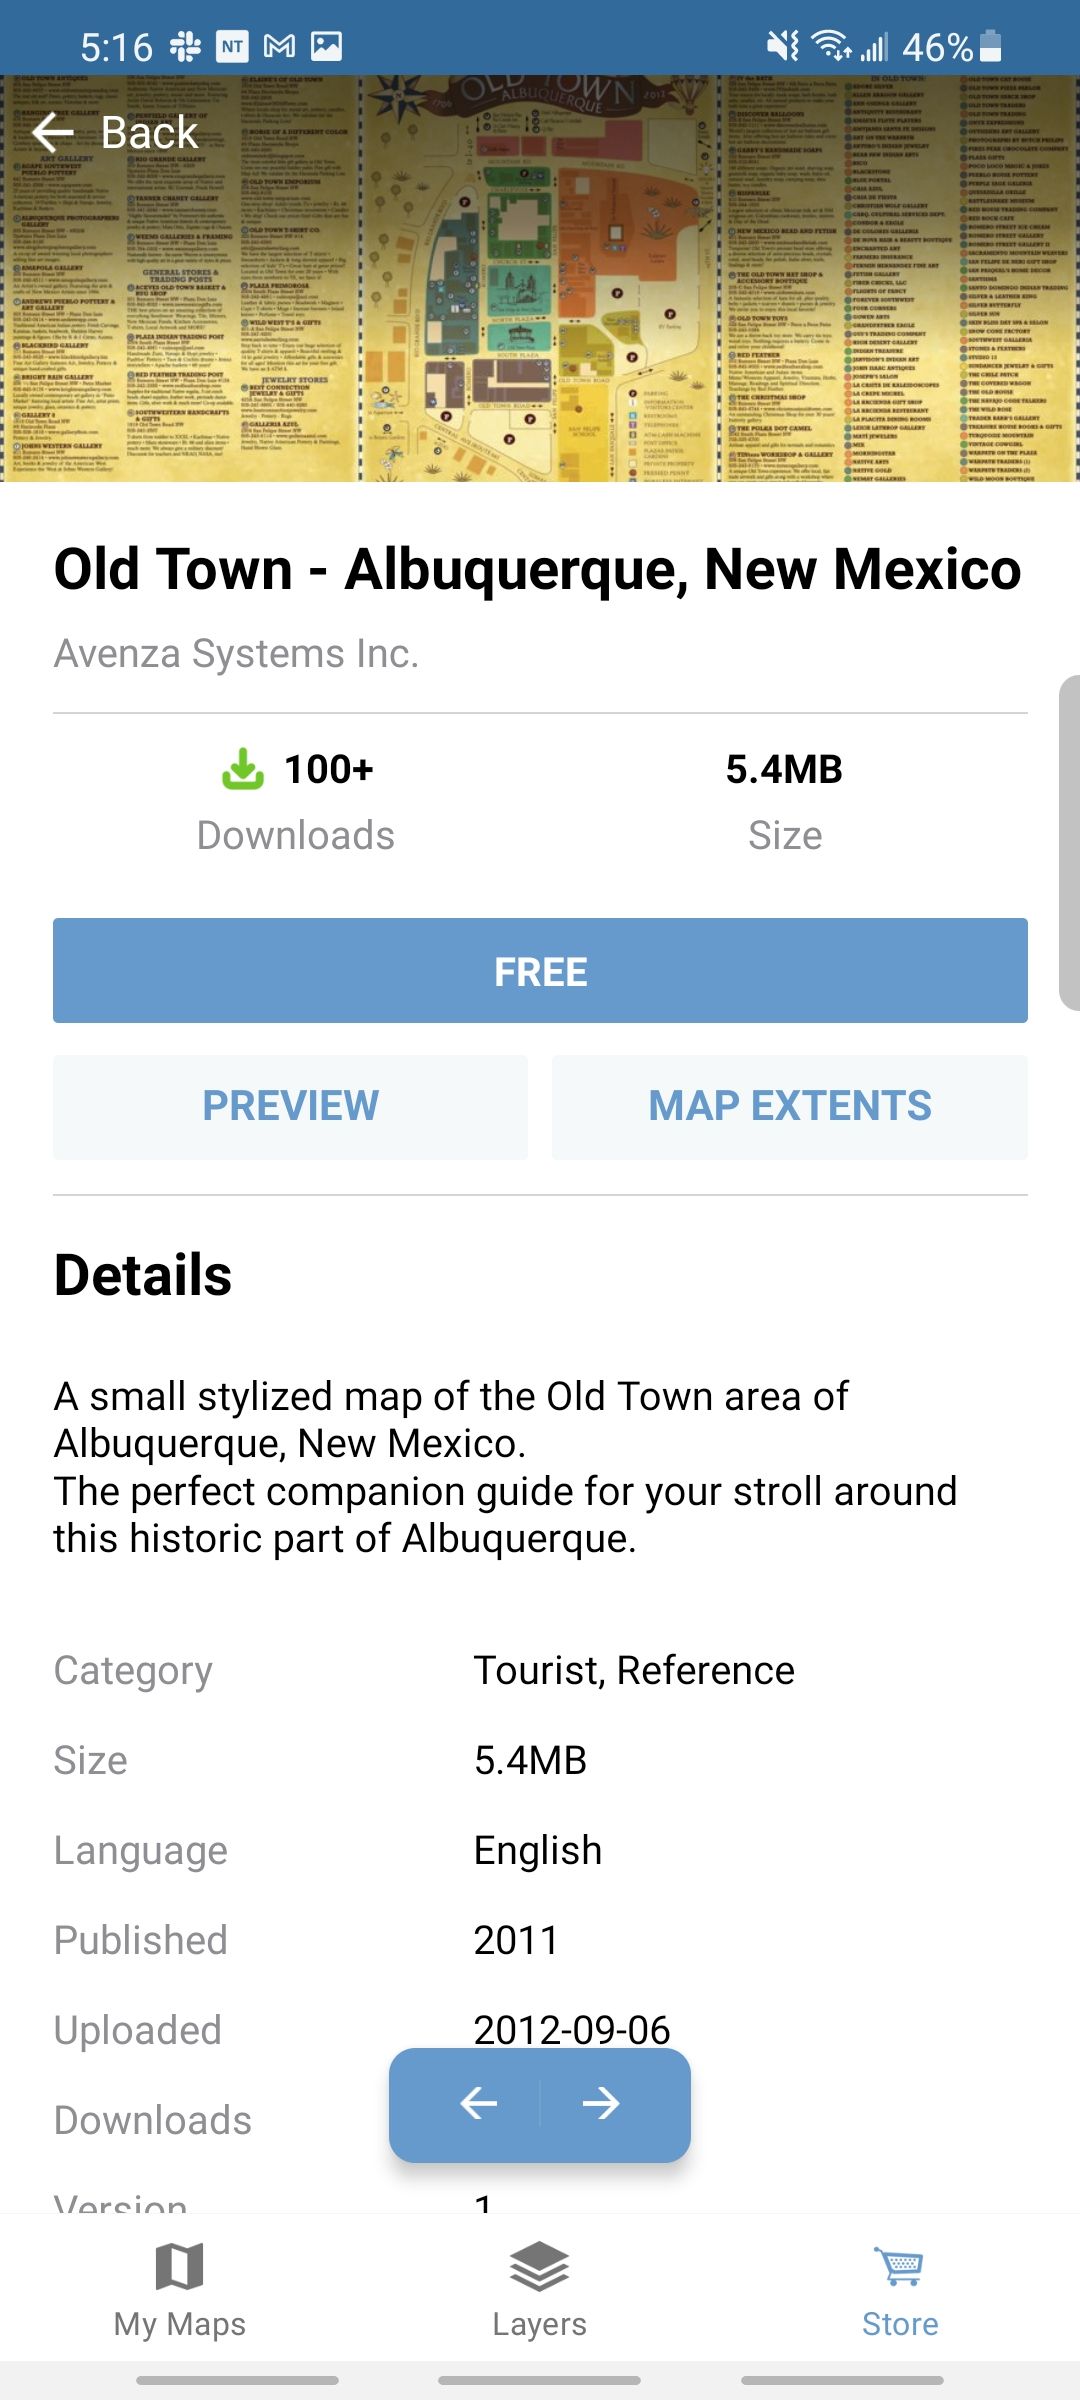 avenza maps app free map of old town in albuquerque new mexico